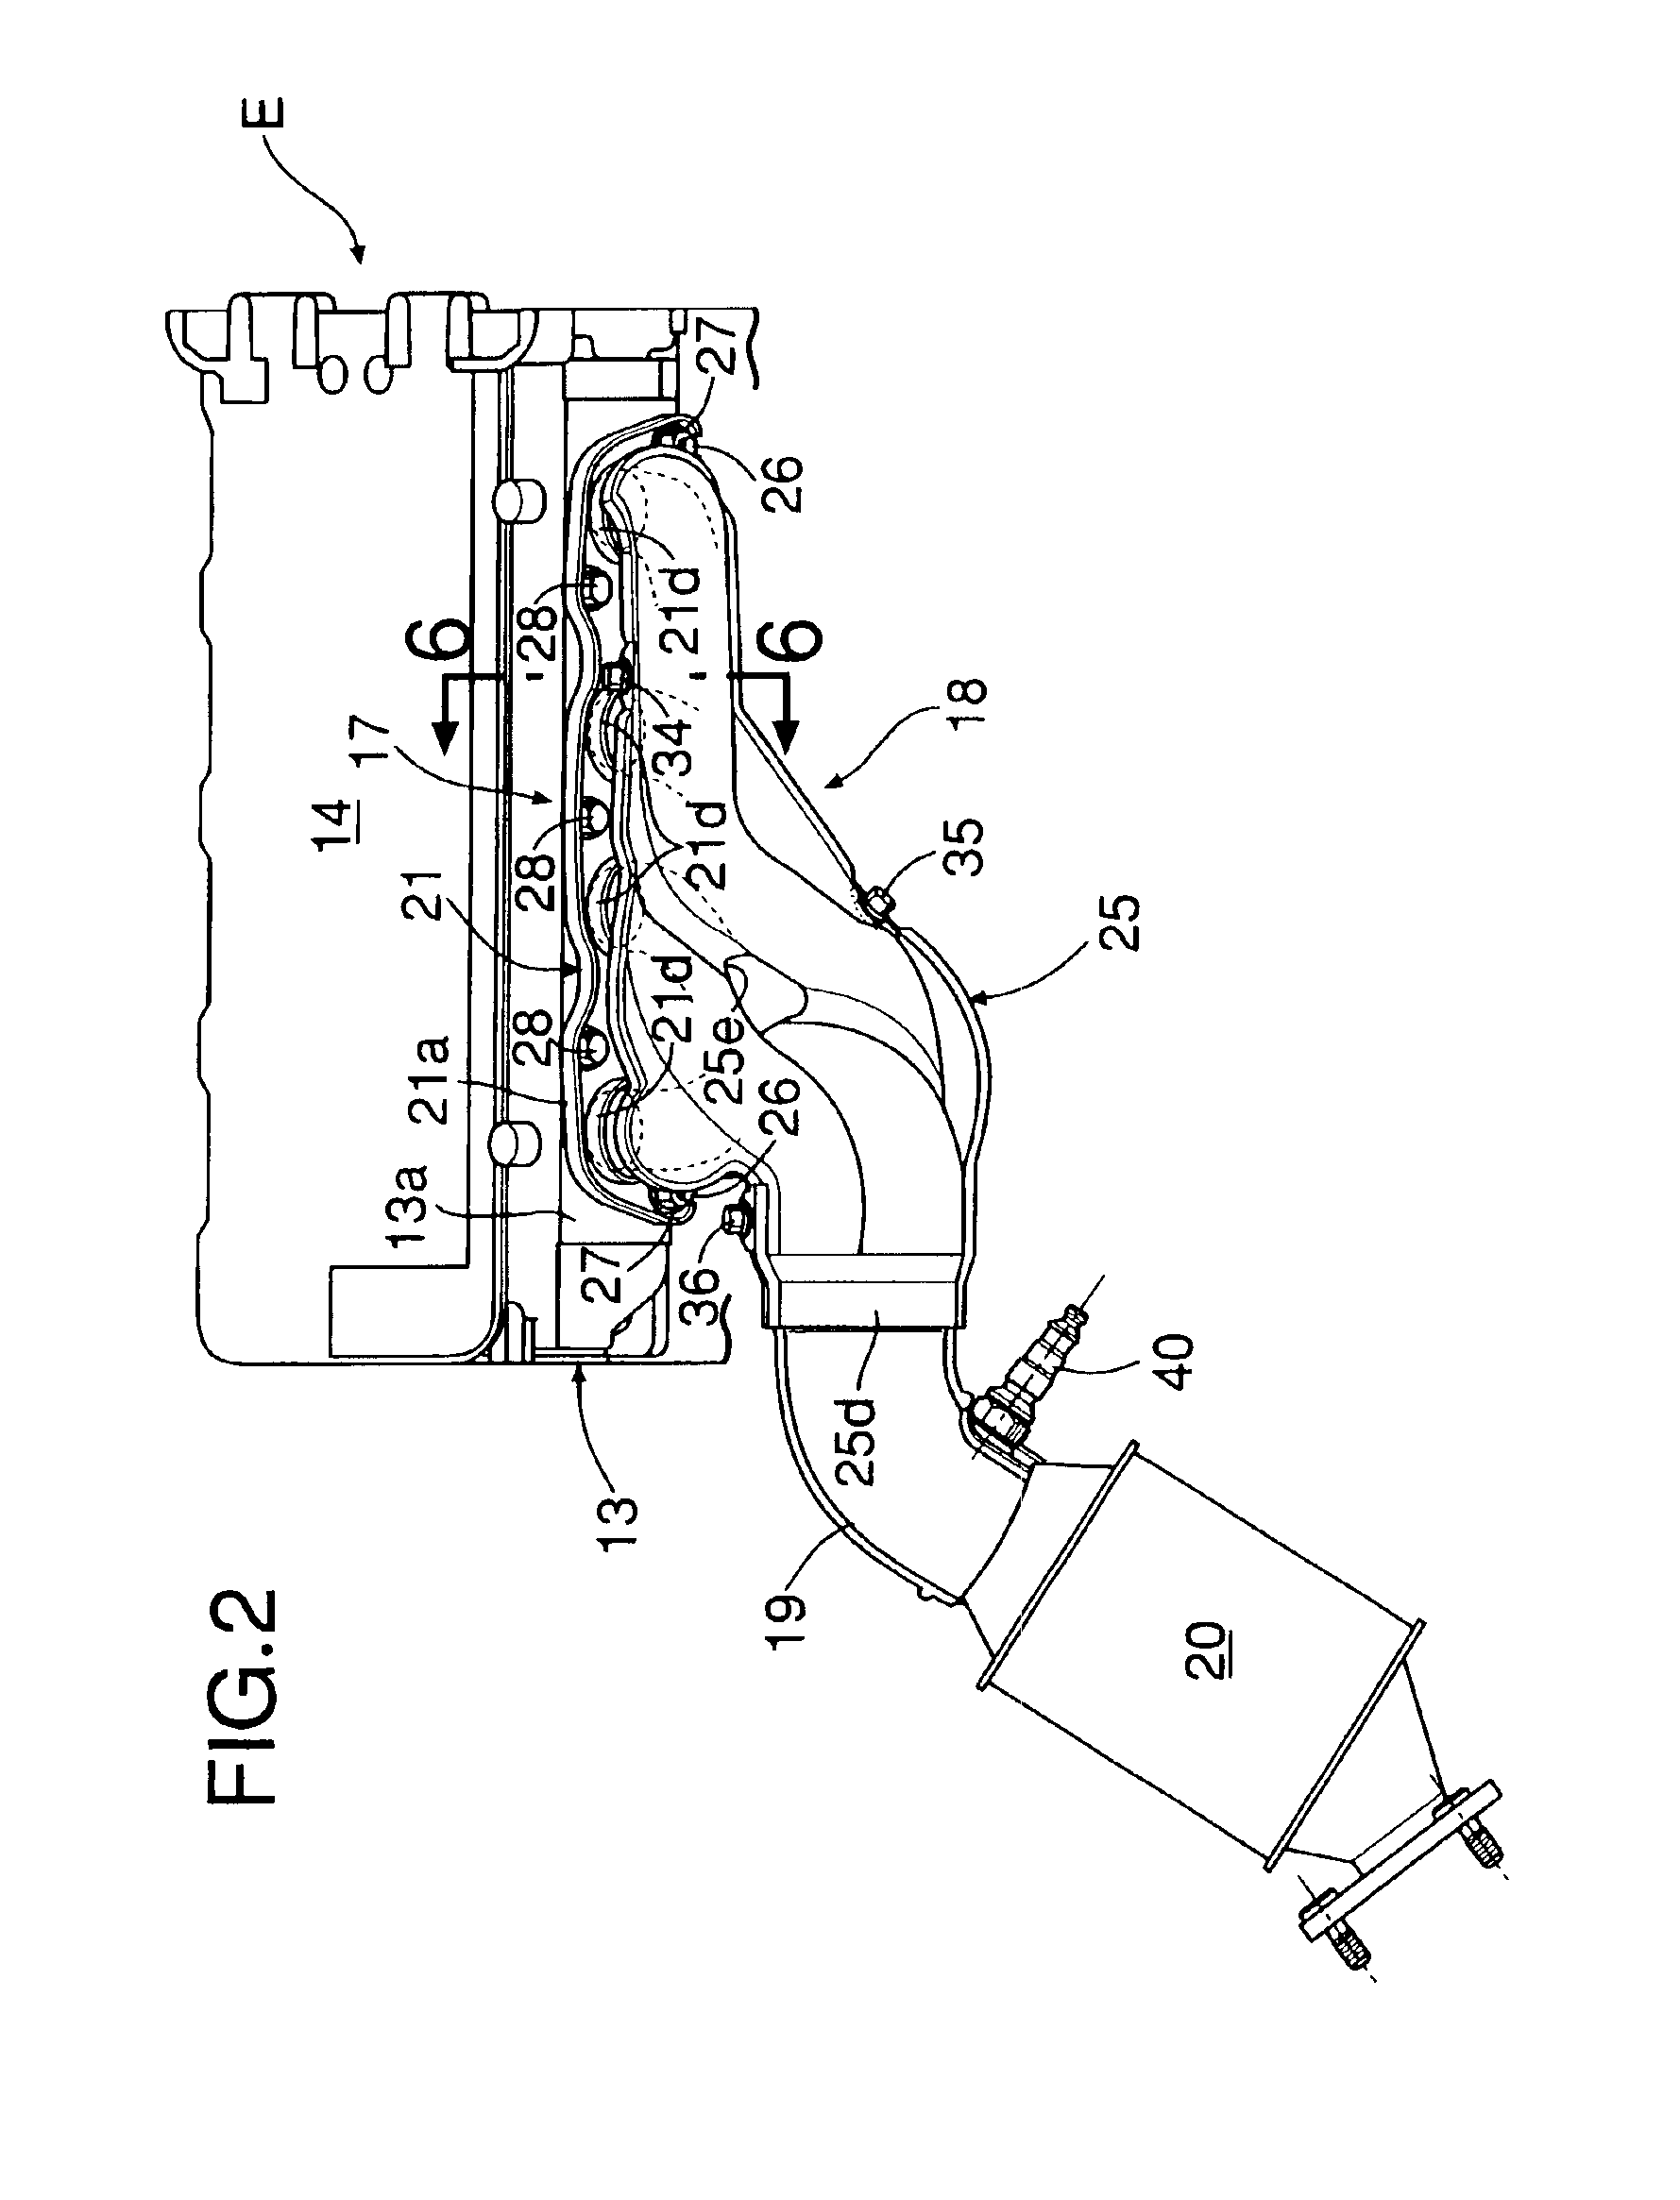 Engine oxygen concentration sensor mounting structure